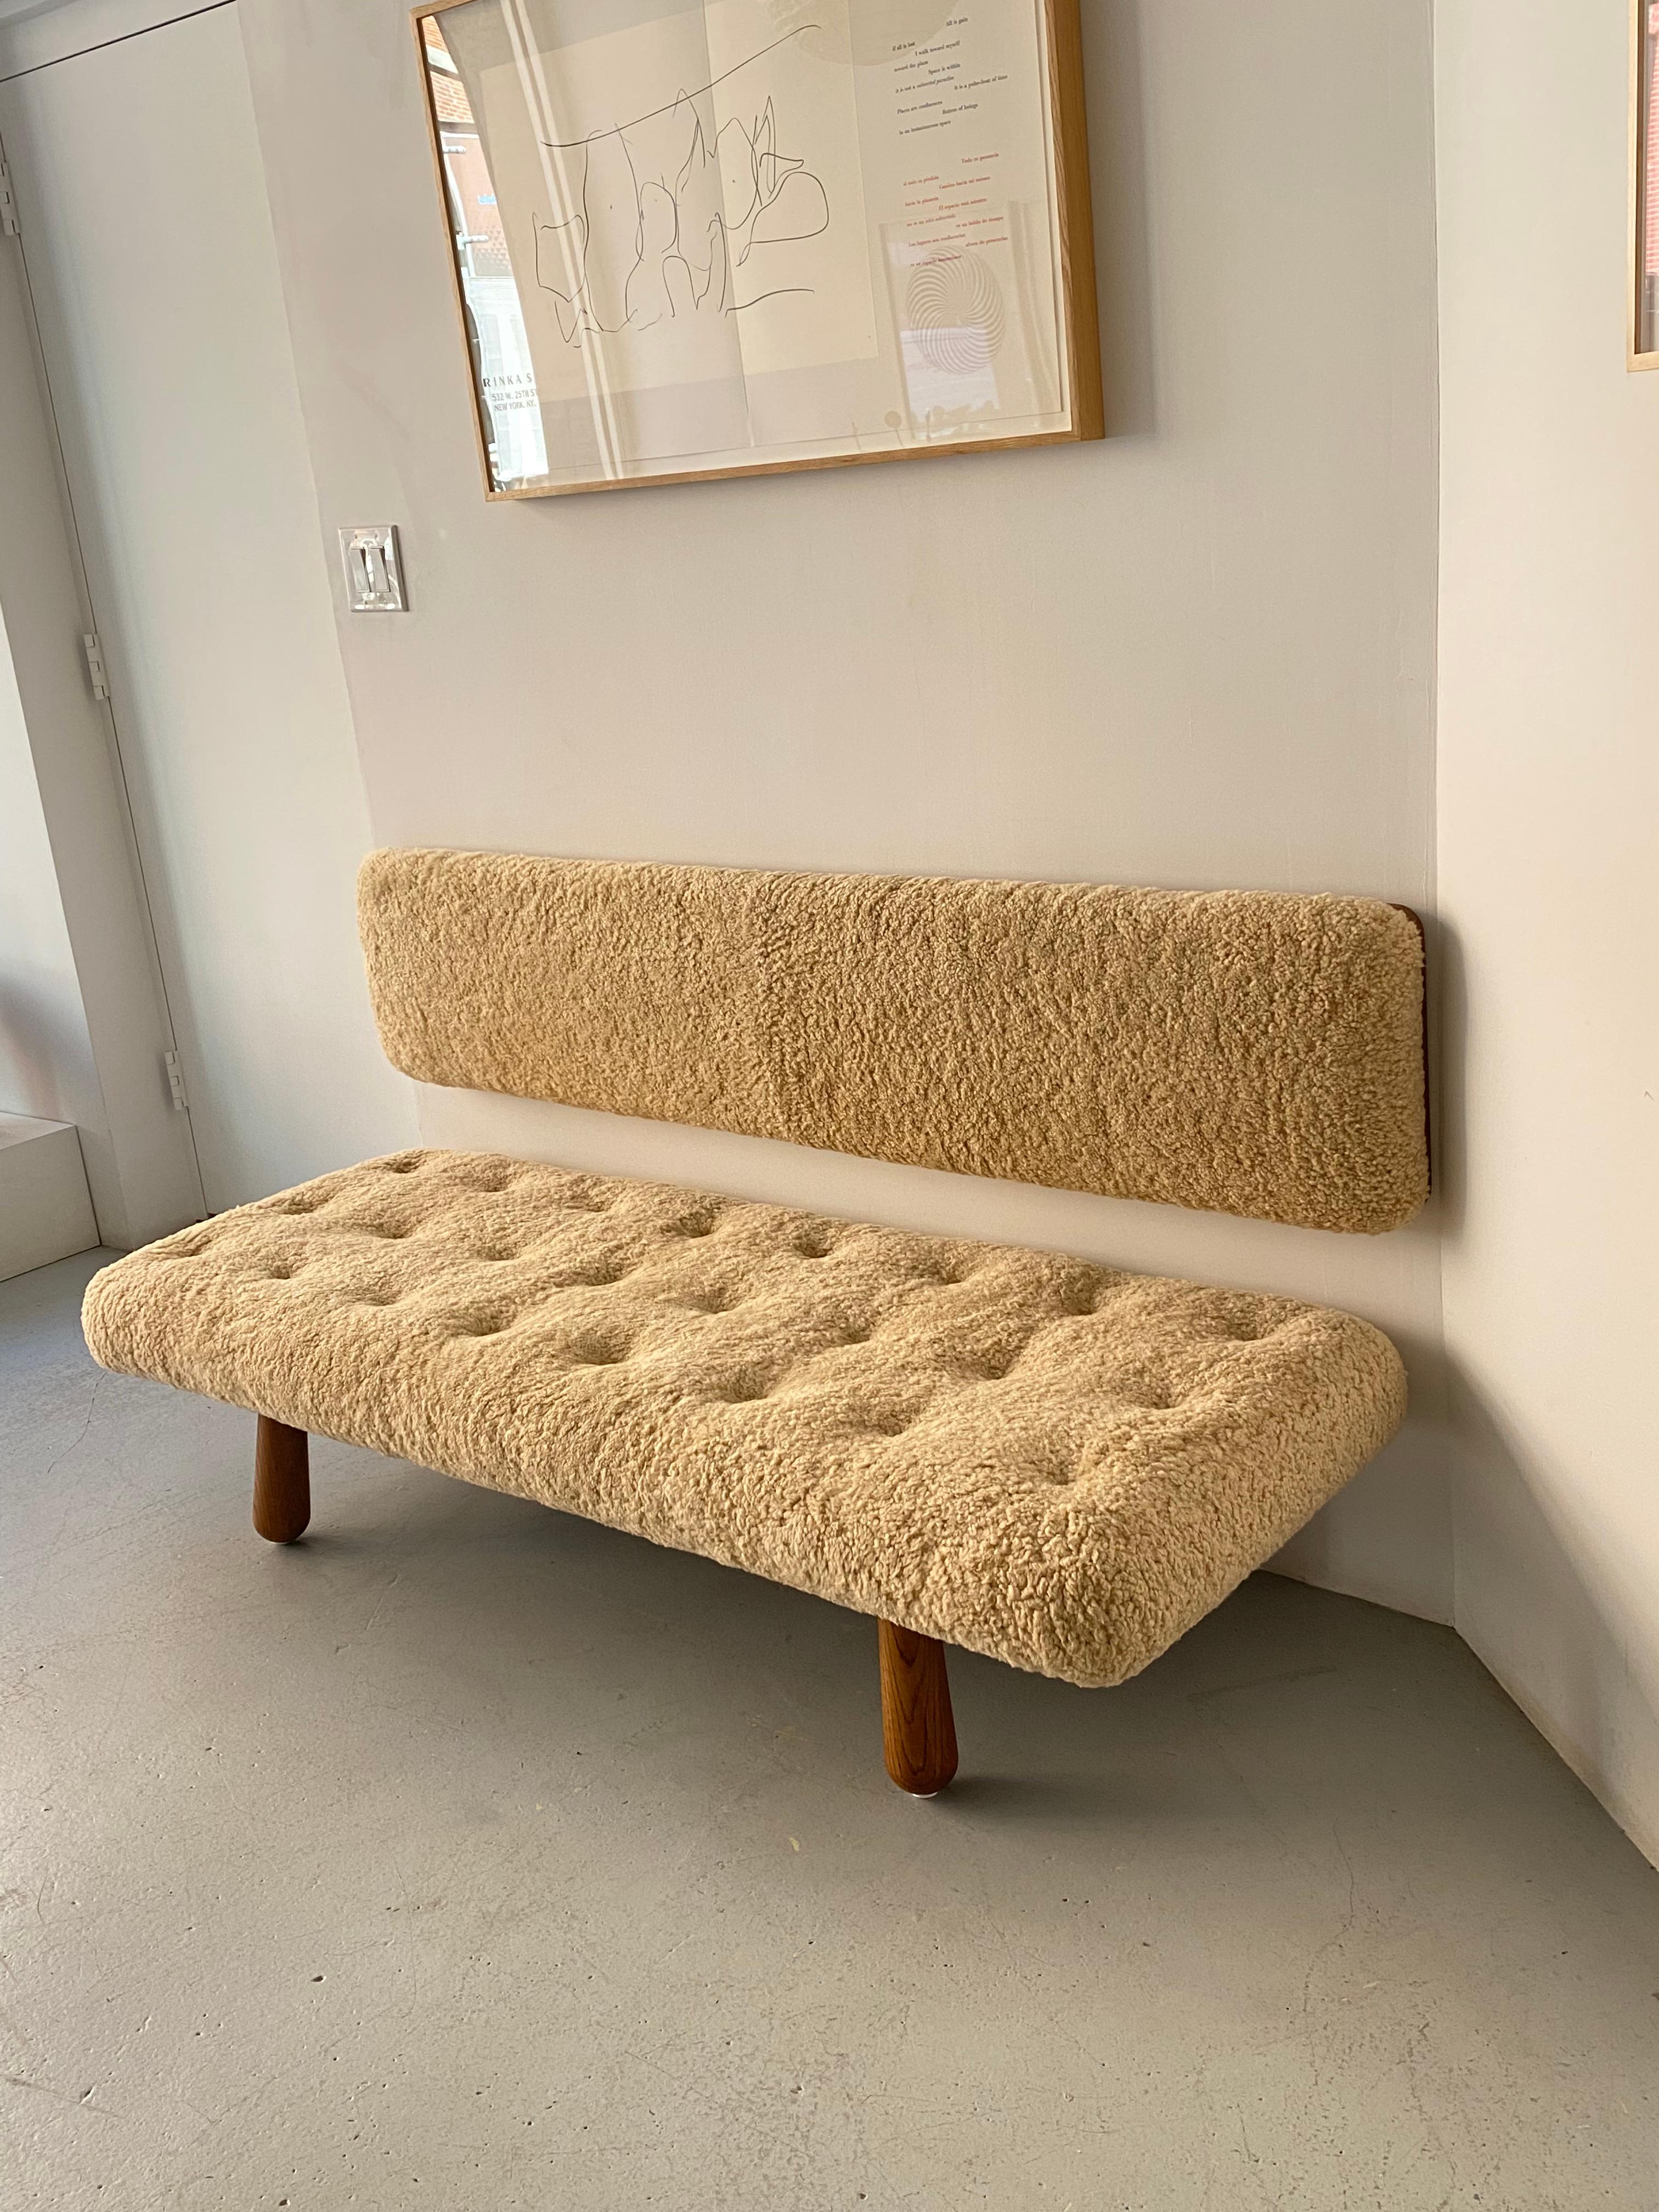 Hand-Crafted ‘Kai’ Couch in Swedish Pine and Australian Shearling